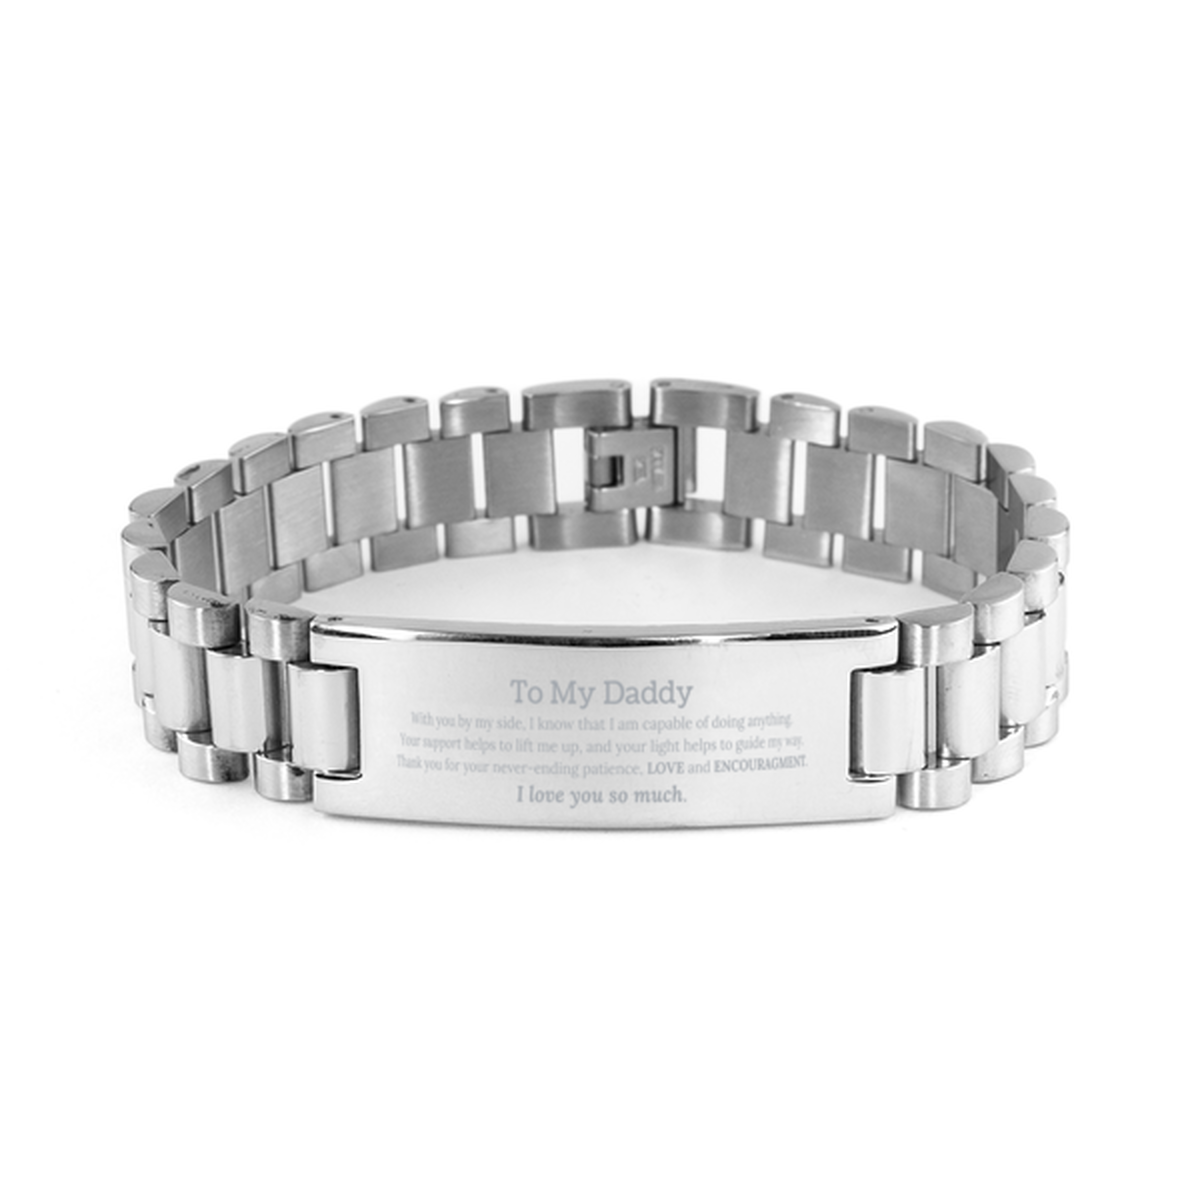 Appreciation Daddy Ladder Stainless Steel Bracelet Gifts, To My Daddy Birthday Christmas Wedding Keepsake Gifts for Daddy With you by my side, I know that I am capable of doing anything. I love you so much